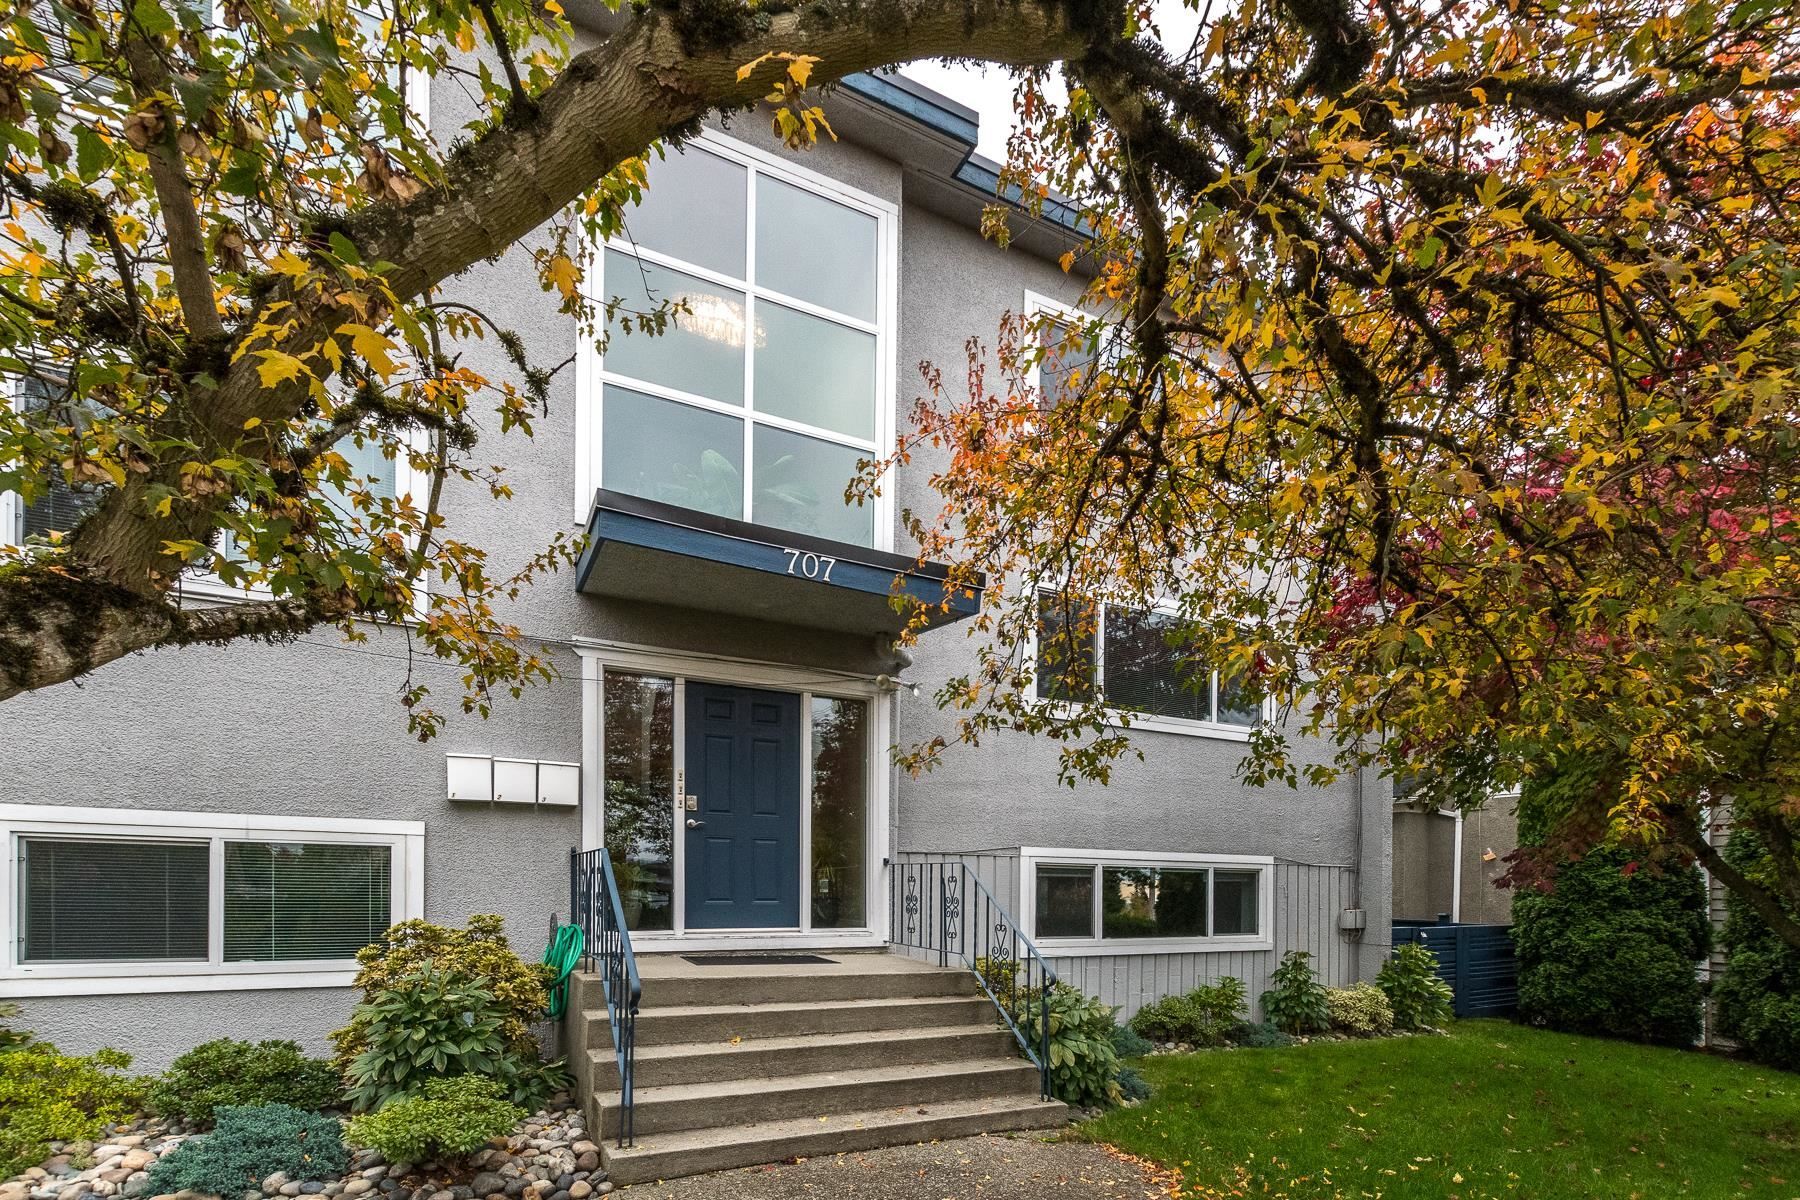 Photo 4: Photos: 707 THIRTEENTH Street in New Westminster: West End NW Triplex for sale : MLS®# R2637008